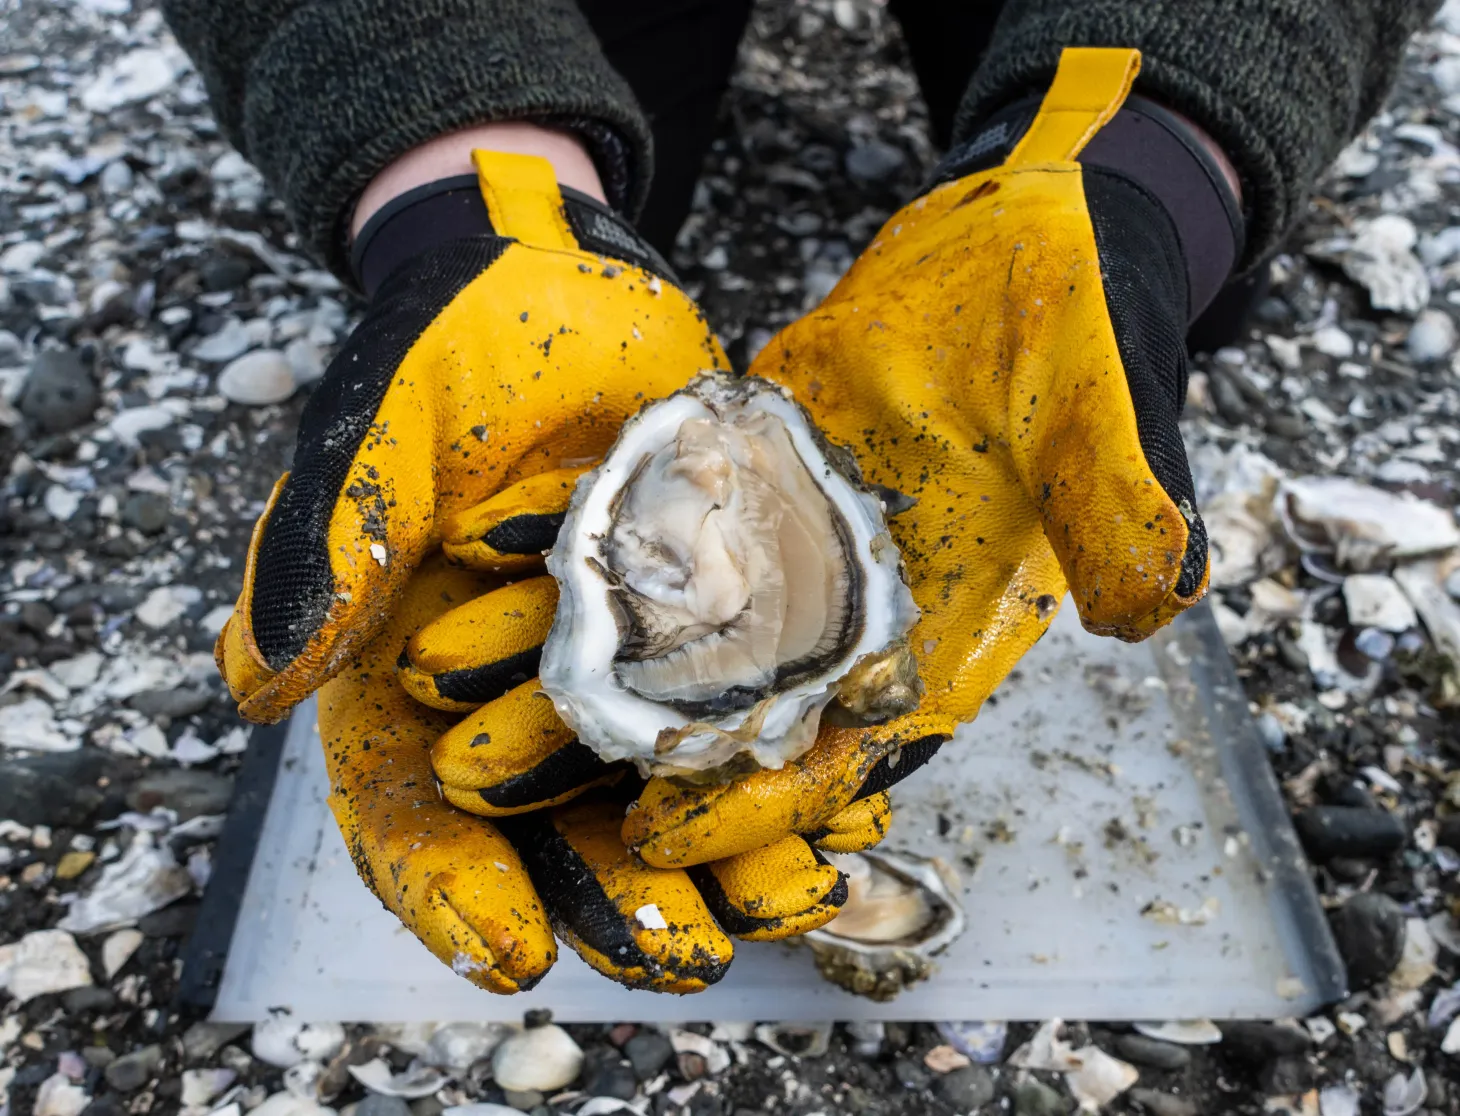 Oyster harvesting in Washington State